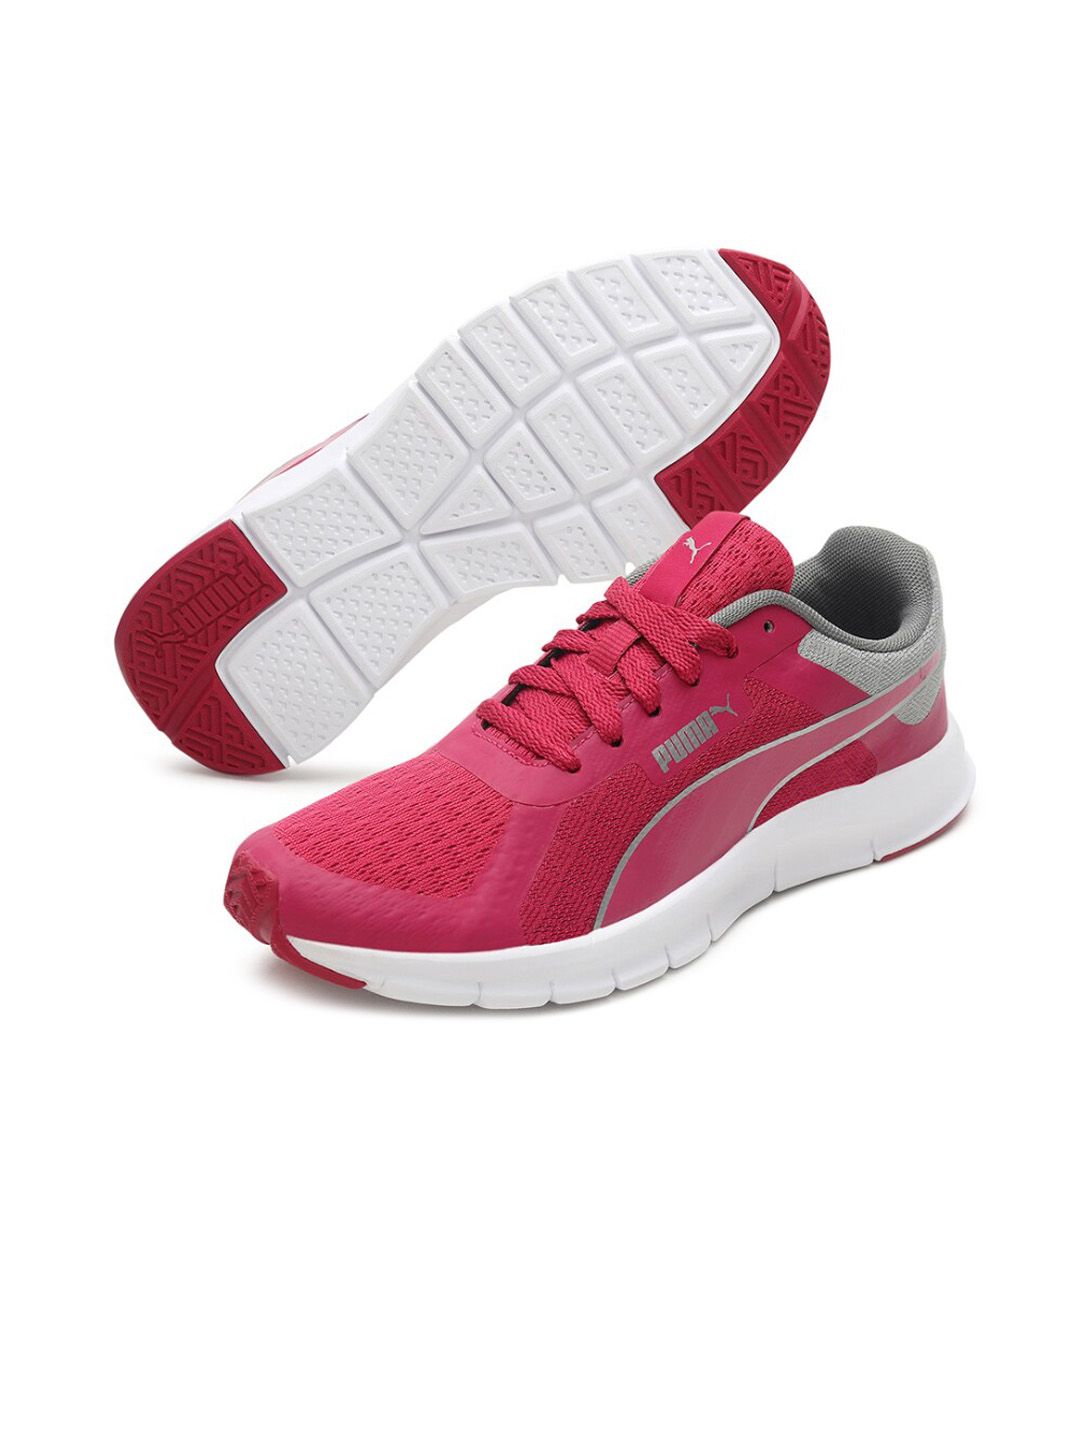 Puma Women Red Trackracer 2.0 Shoes Price in India